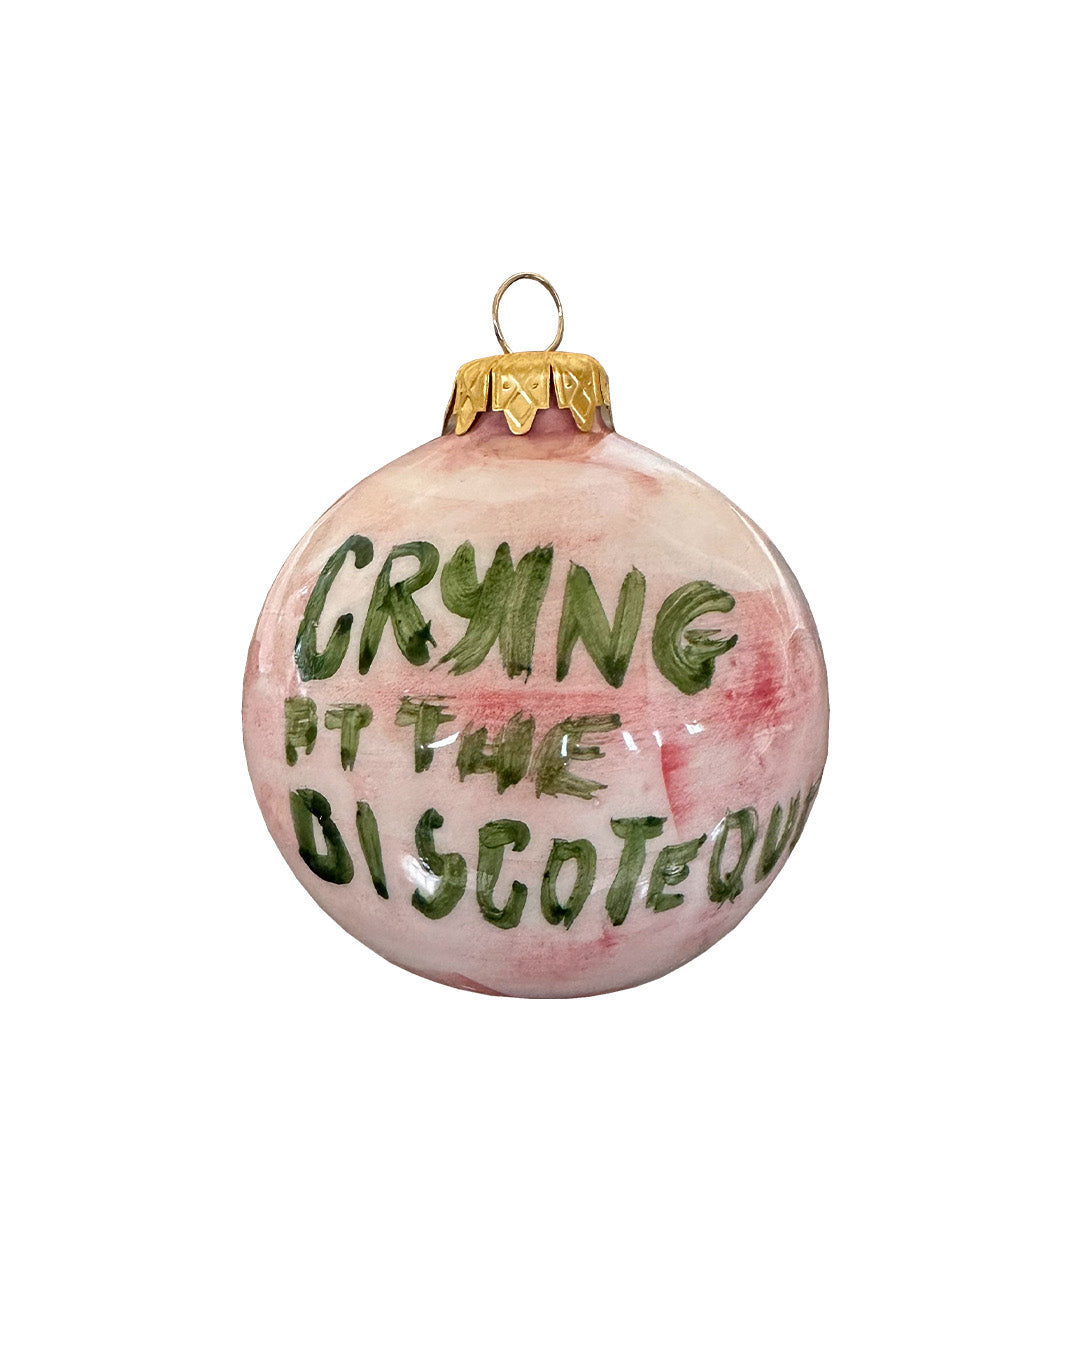 "Crying at the discoteque" Christmas ball